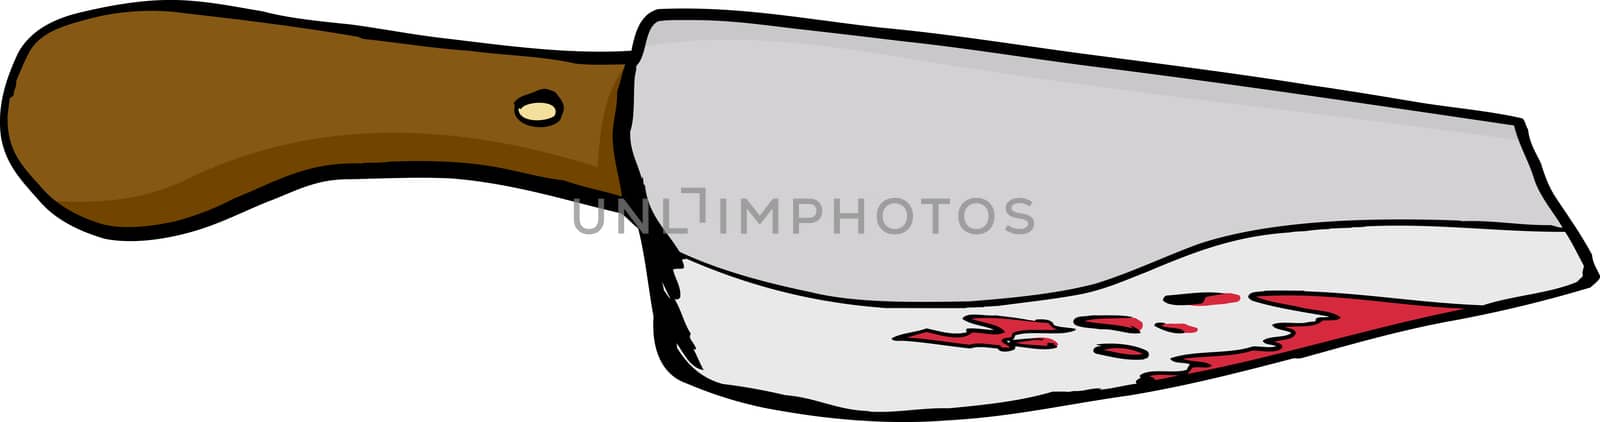 Single bloody meat cleaver drawing over white background